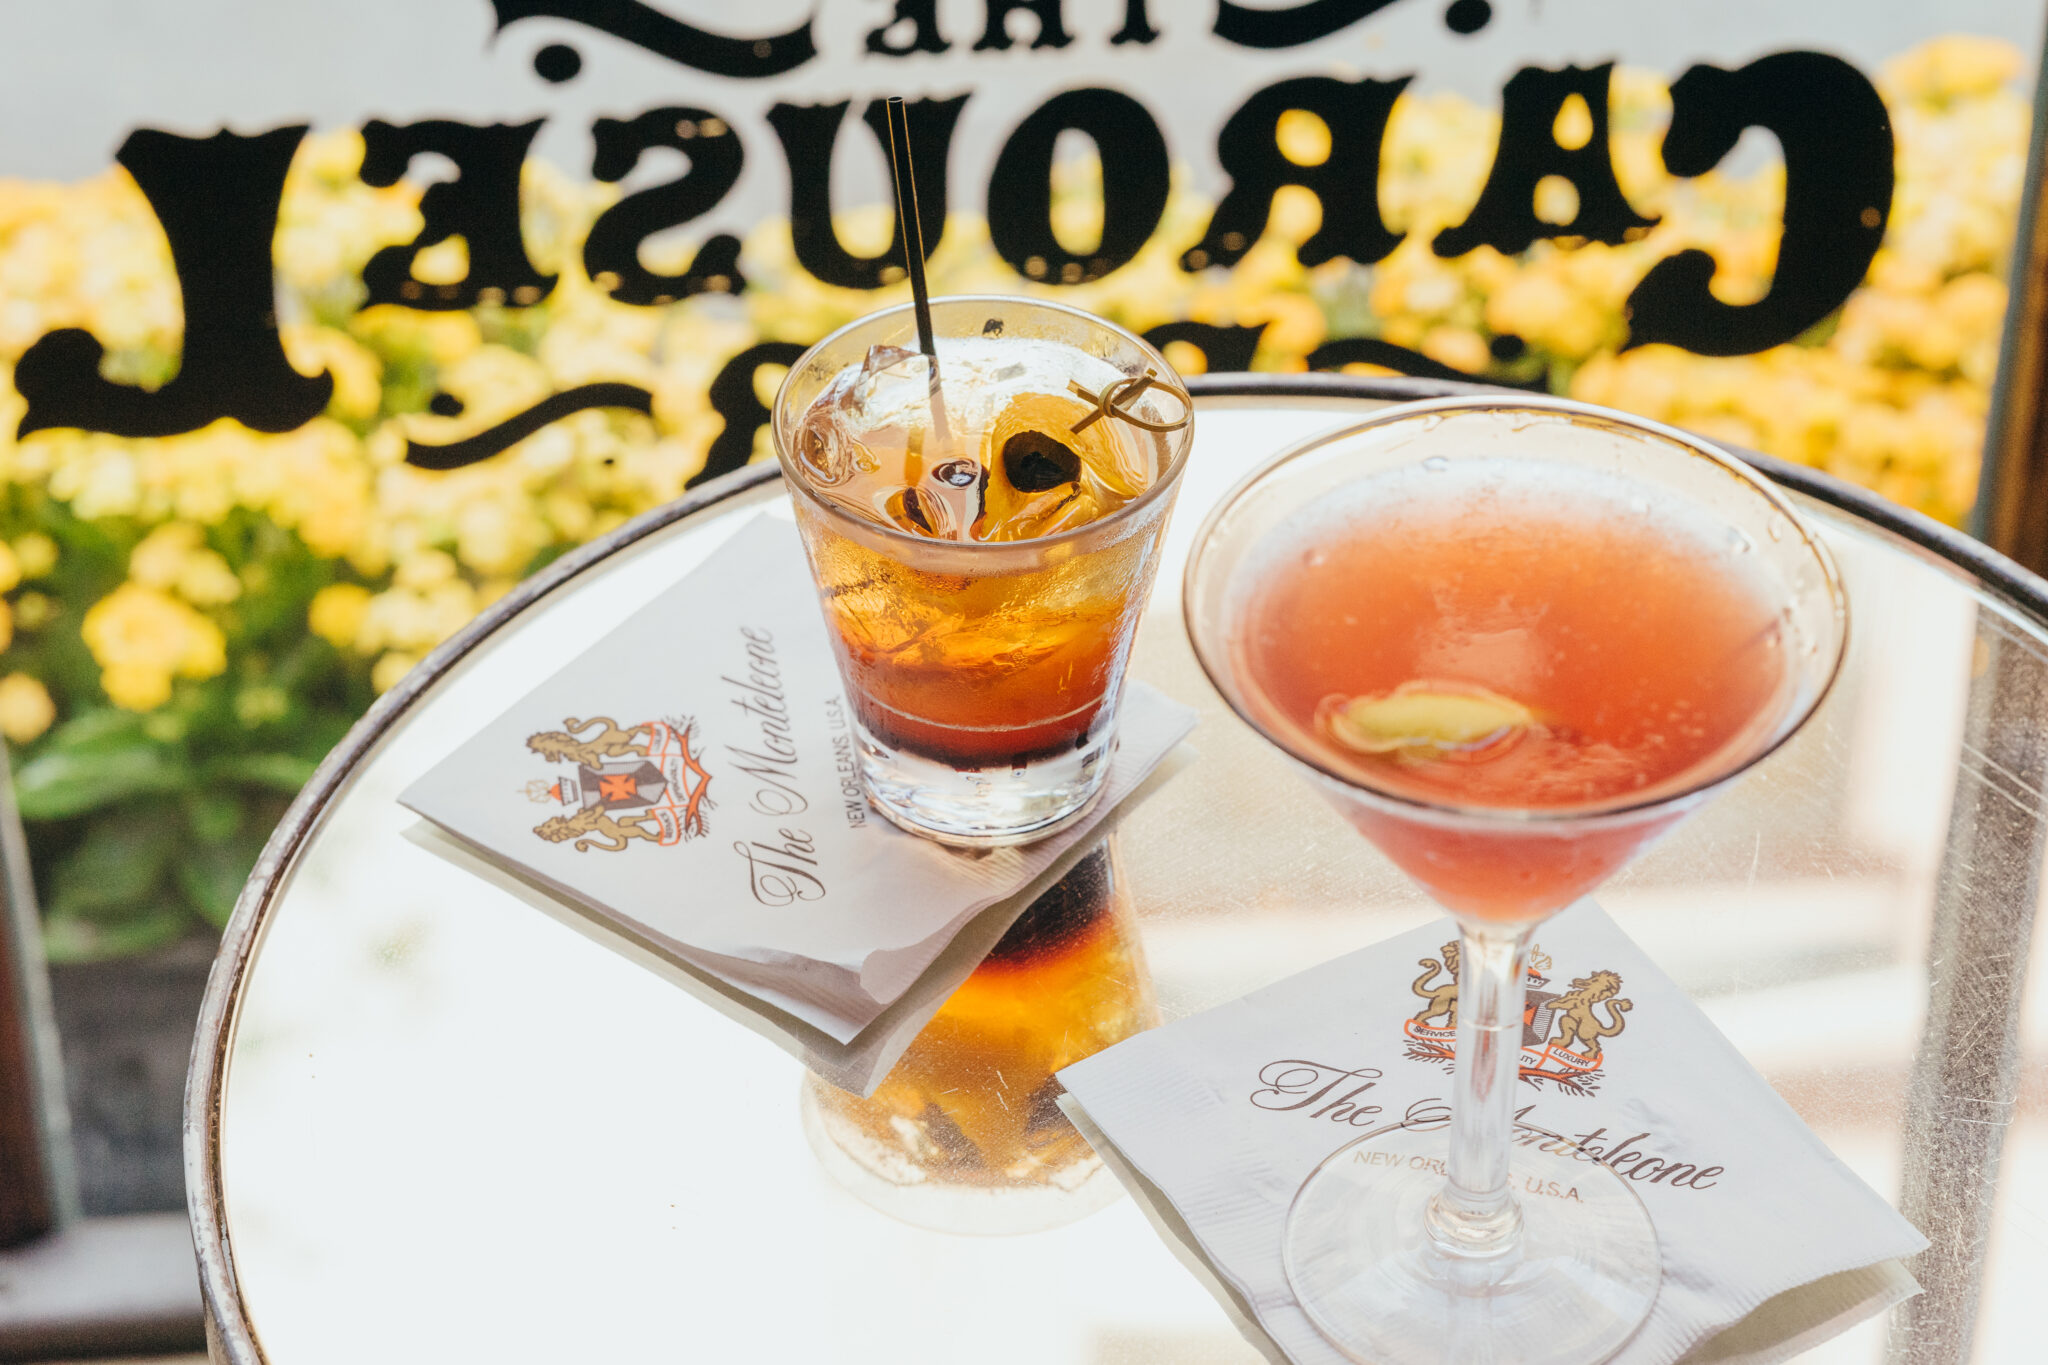 Old Fashioned and Poire Rouge Martini - Carousel Bar - Hotel Mon